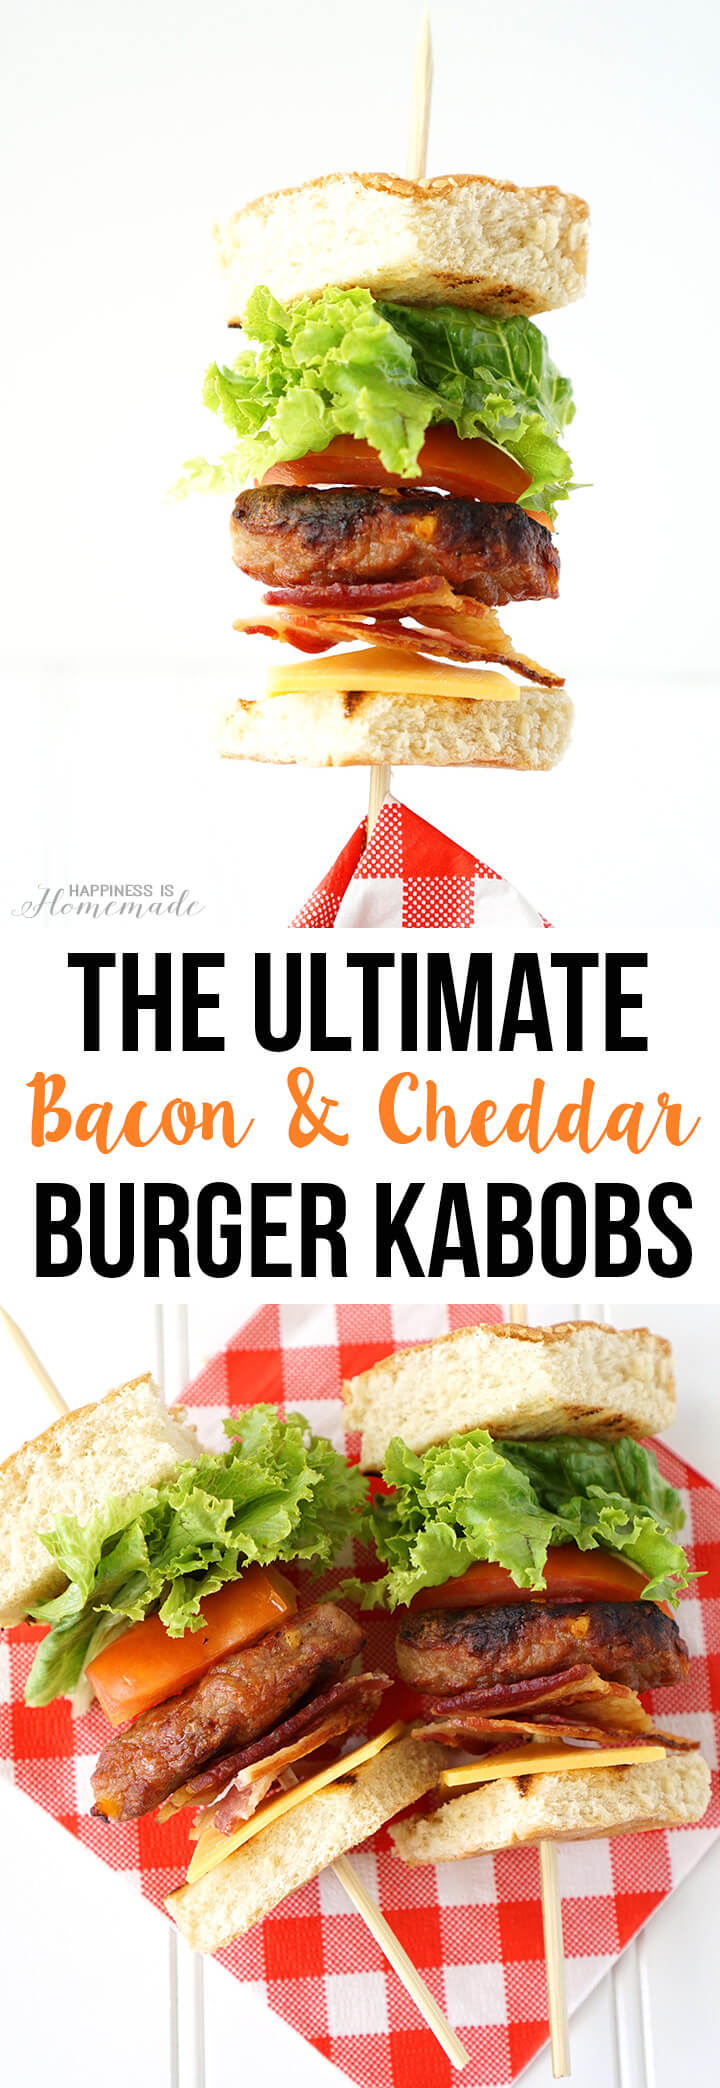 The Ultimate Bacon and Cheddar Burger Kabobs